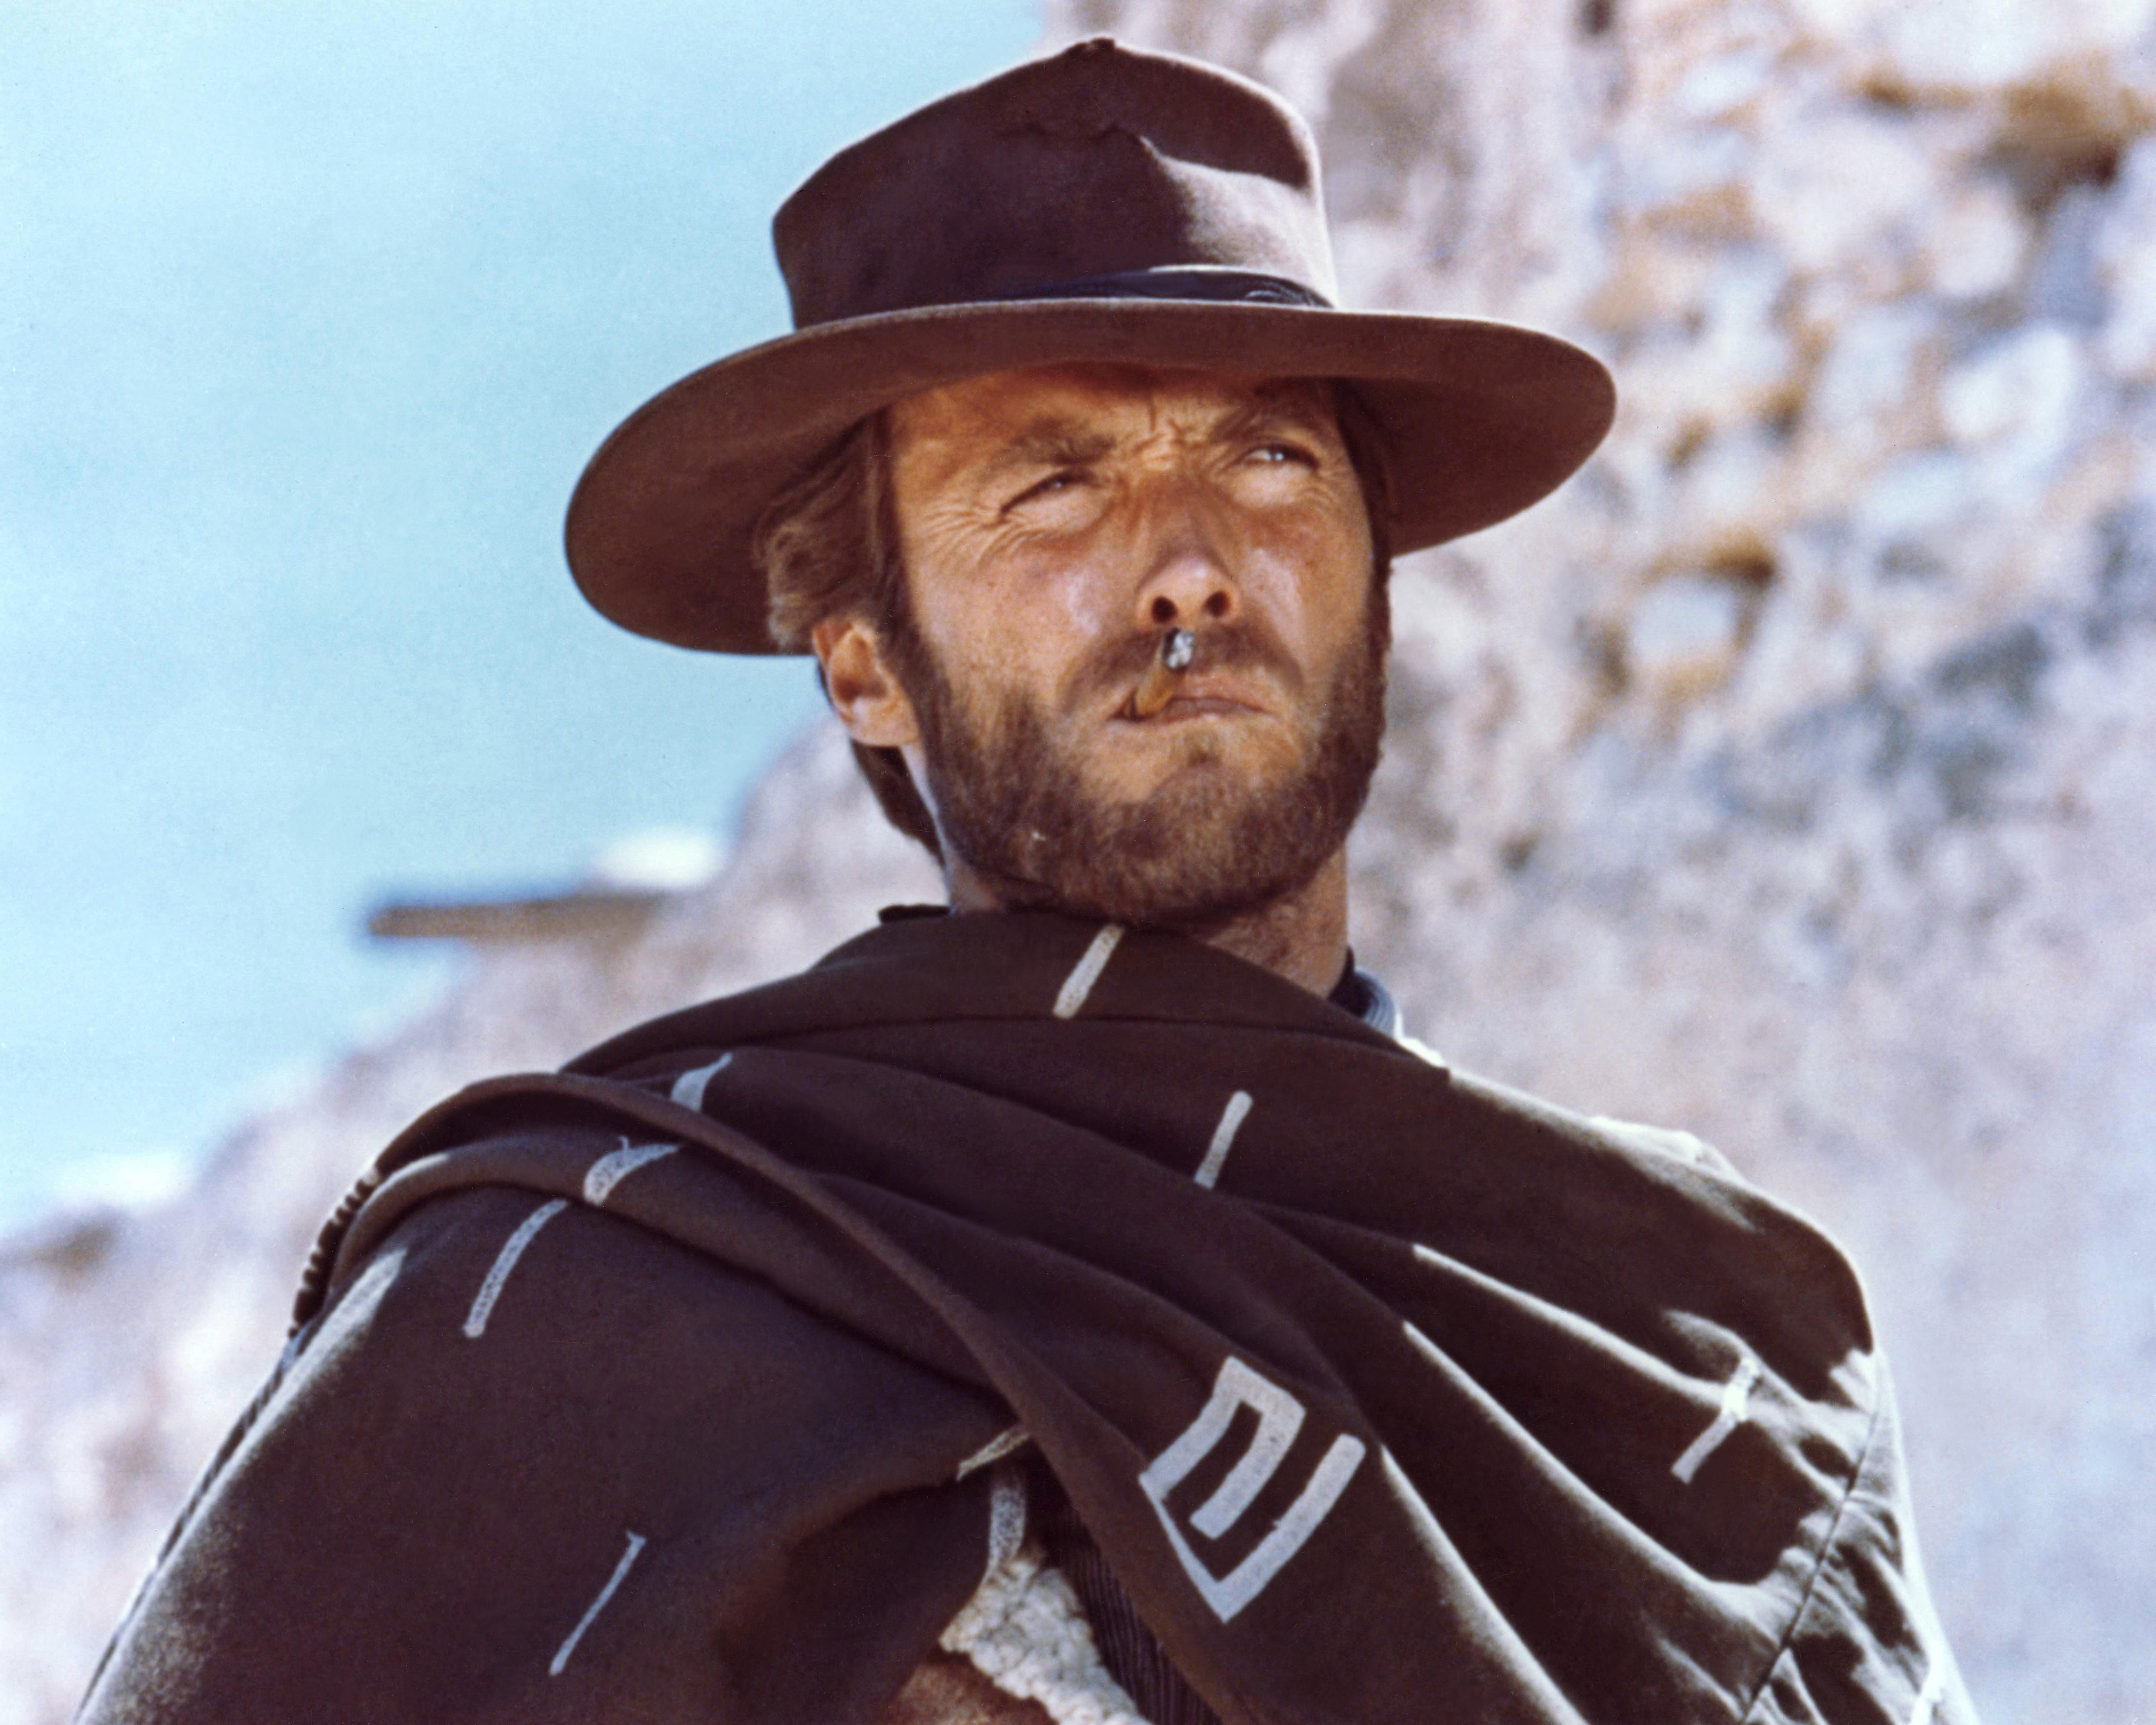 Clint Eastwood, seen here in the 1965 film For a Few Dollars More, is known for his iconic roles in Westerns, including The Good, The Bad and the Ugly (1966)